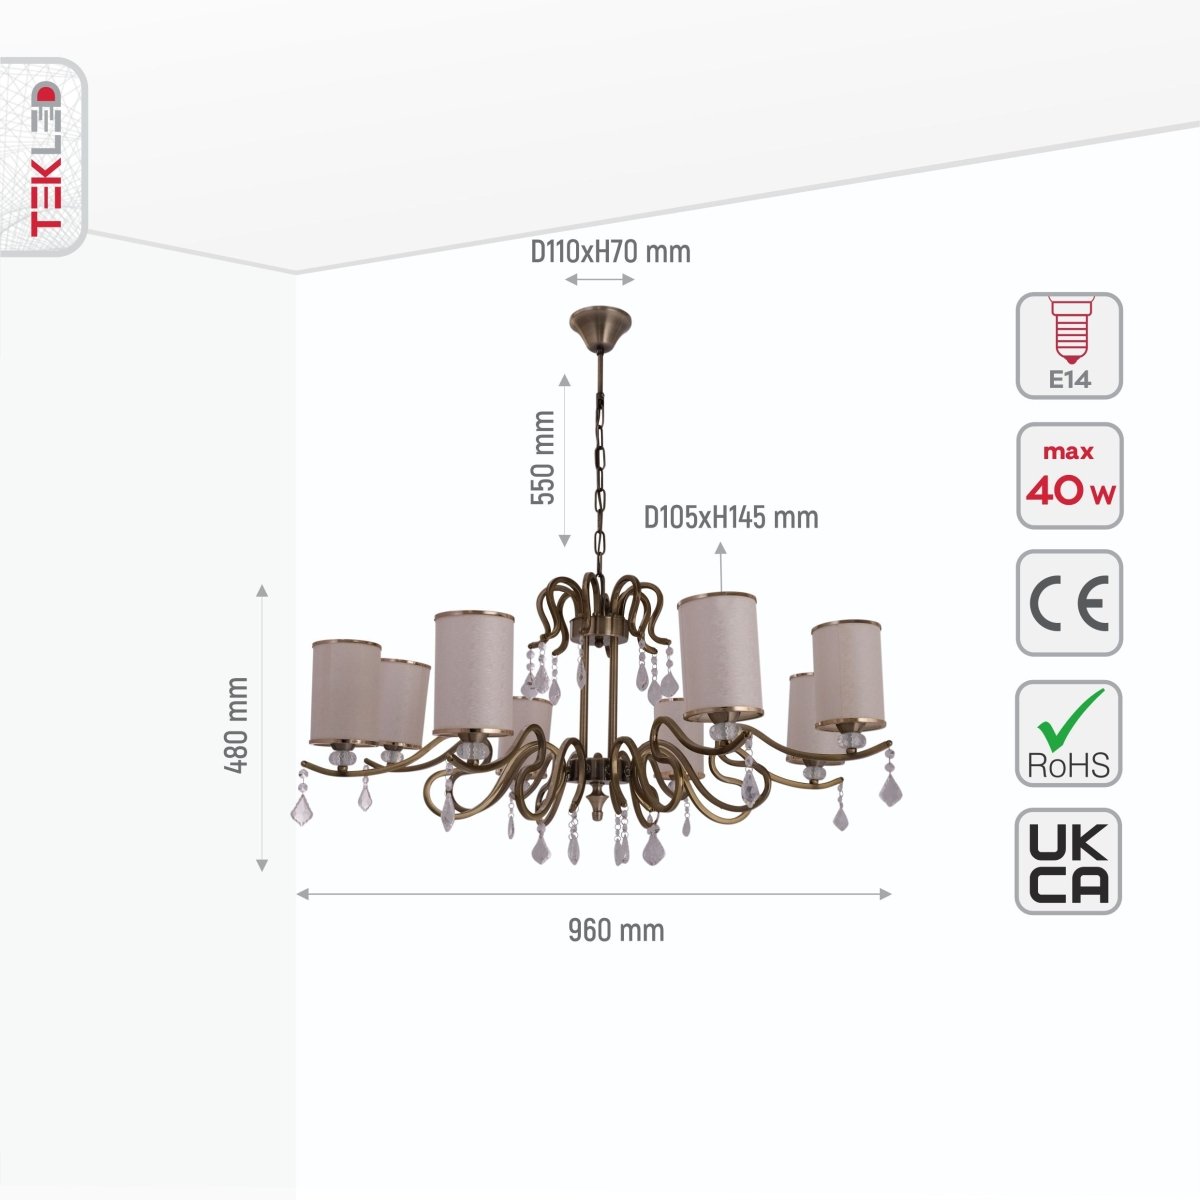 Size and specs of Cream Shade Antique Brass Metal 8 Arm Chandelier with Pendeloque Crystals 8xE14 | TEKLED 158-17828